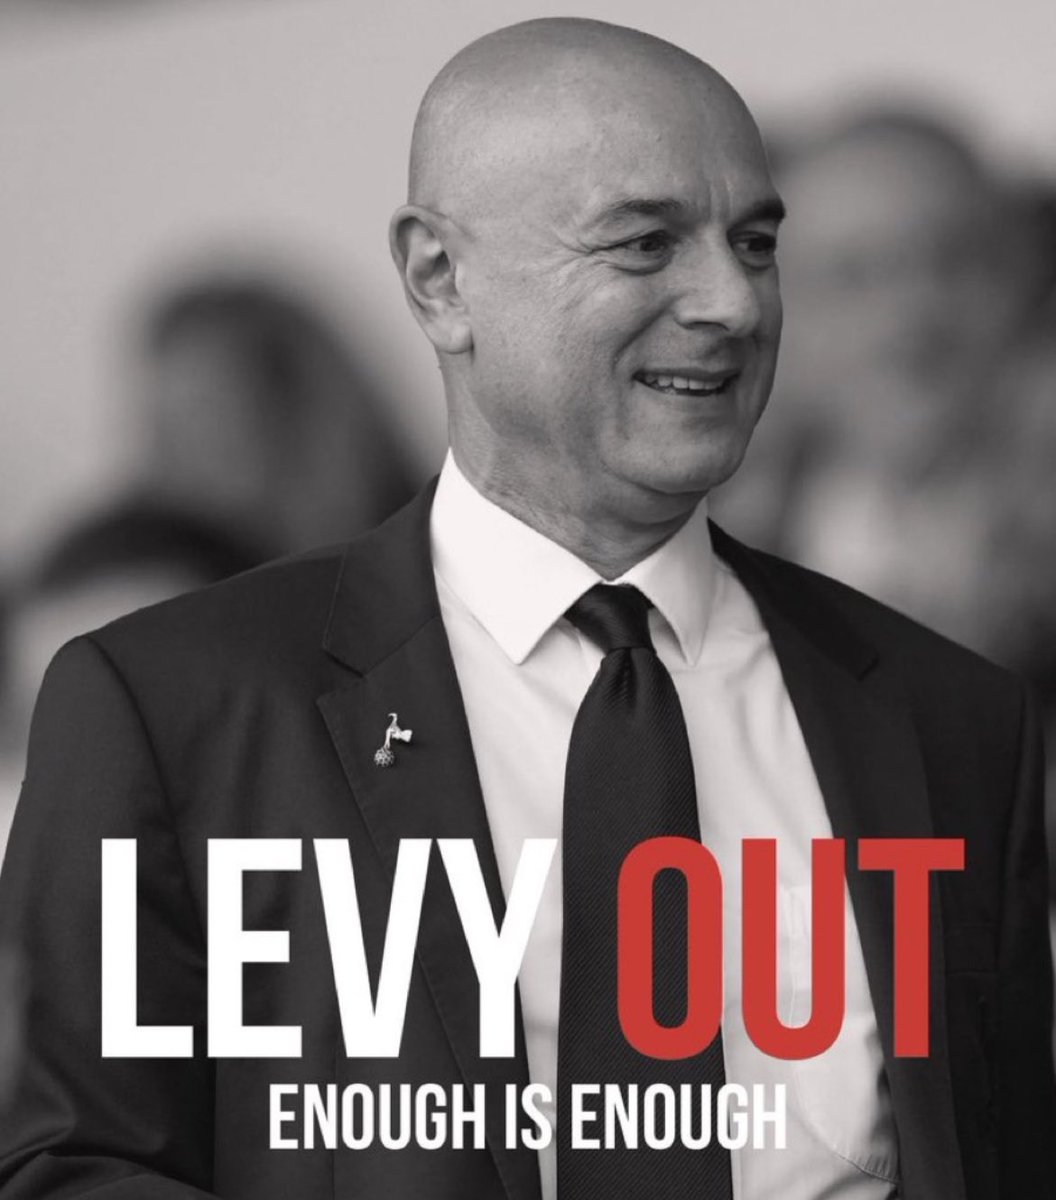 I’ve accepted we’ll never win anything whilst Levy & Co own the club. Doesn’t  really matter who the manager is we’ll always fall short eventually.
Ange seems a decent enough bloke and his teams try and play attacking football so that’ll do for me.

#LevyOut

#ENICOUT